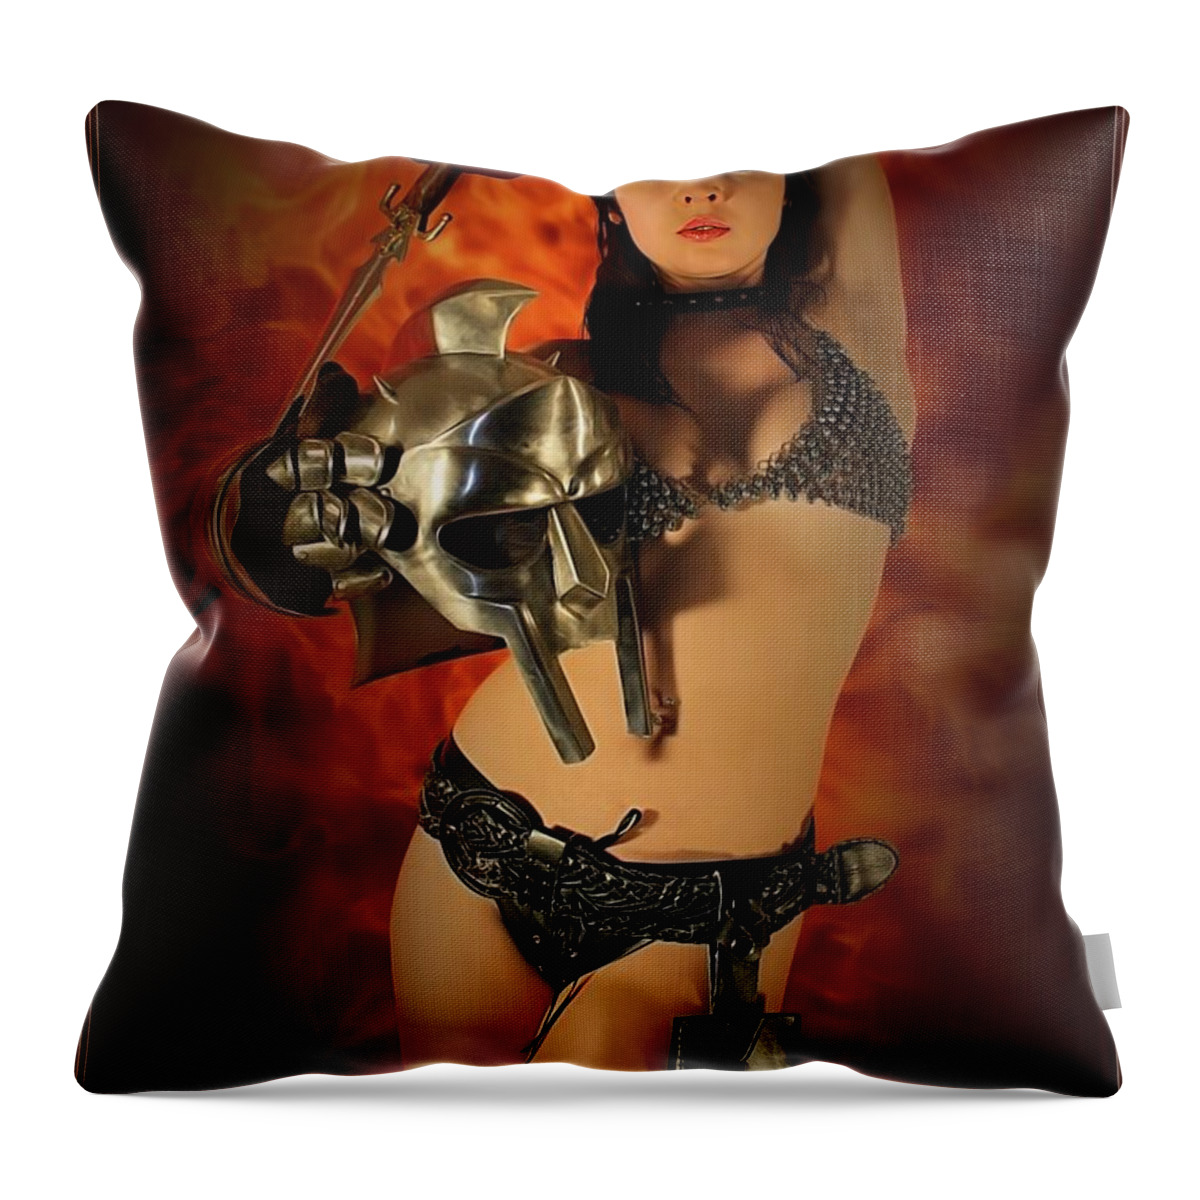 Fantasy Throw Pillow featuring the photograph Rebel Fire by Jon Volden